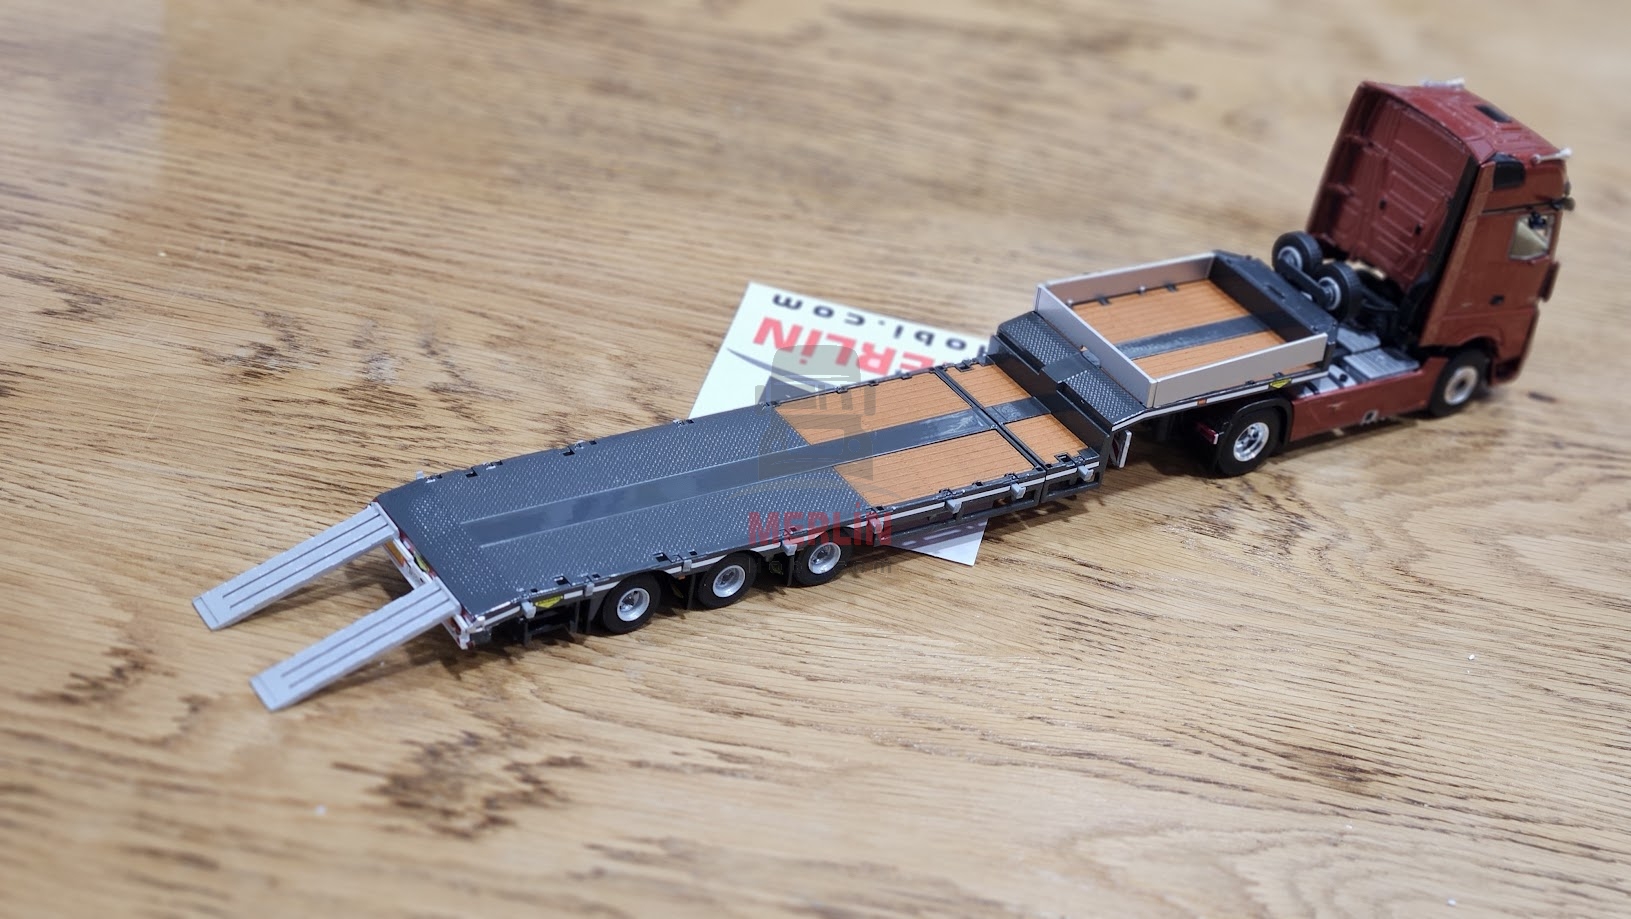 1/50 Mercedes Actros MP5 1853 4x2 +  Lowbed LOWLOADER- 3 AXLE